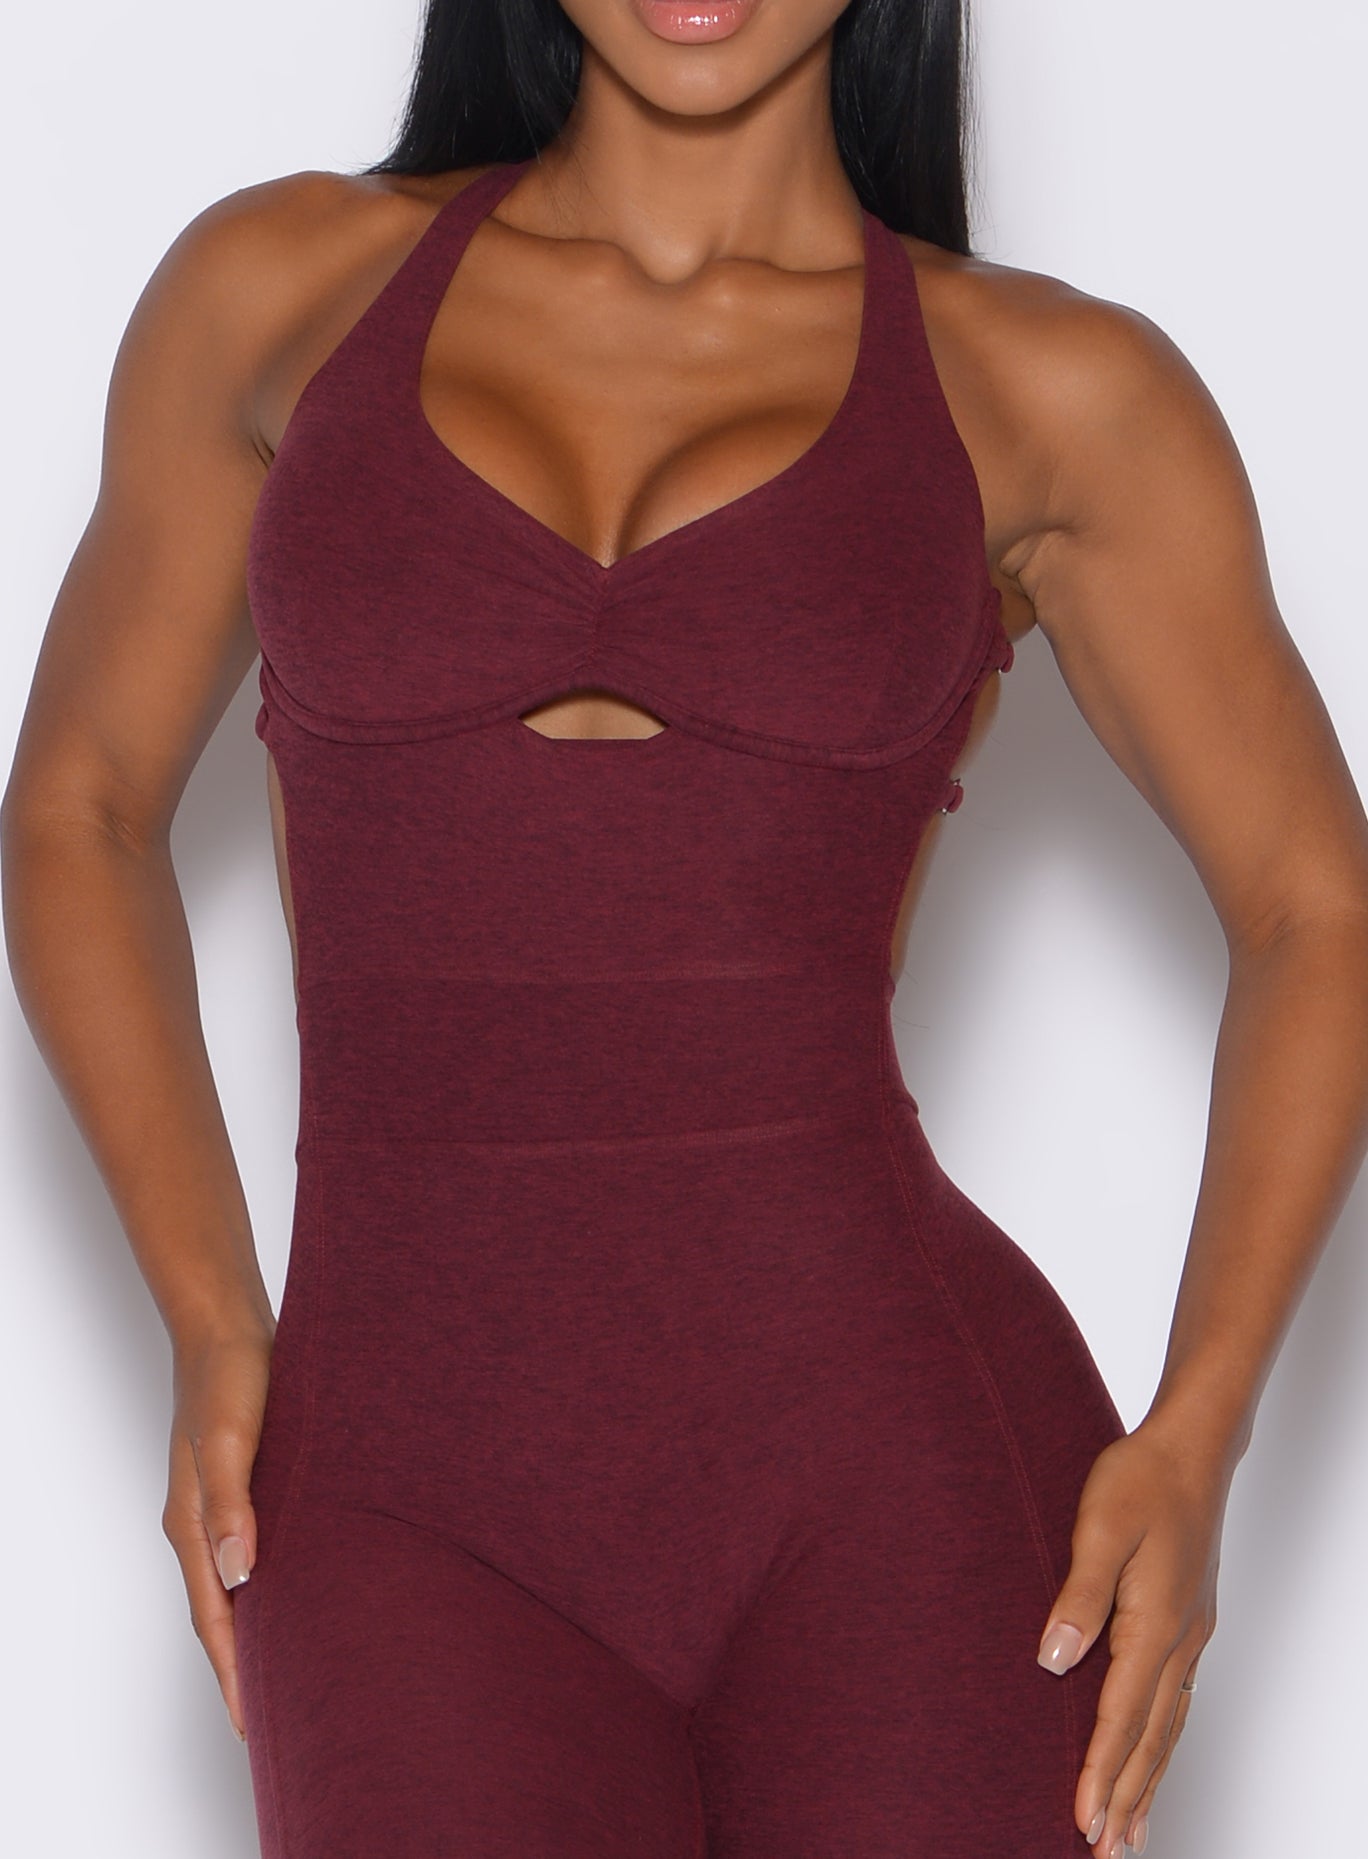 Zoomed in profile view of a model in our bombshell bodysuit in red wine color